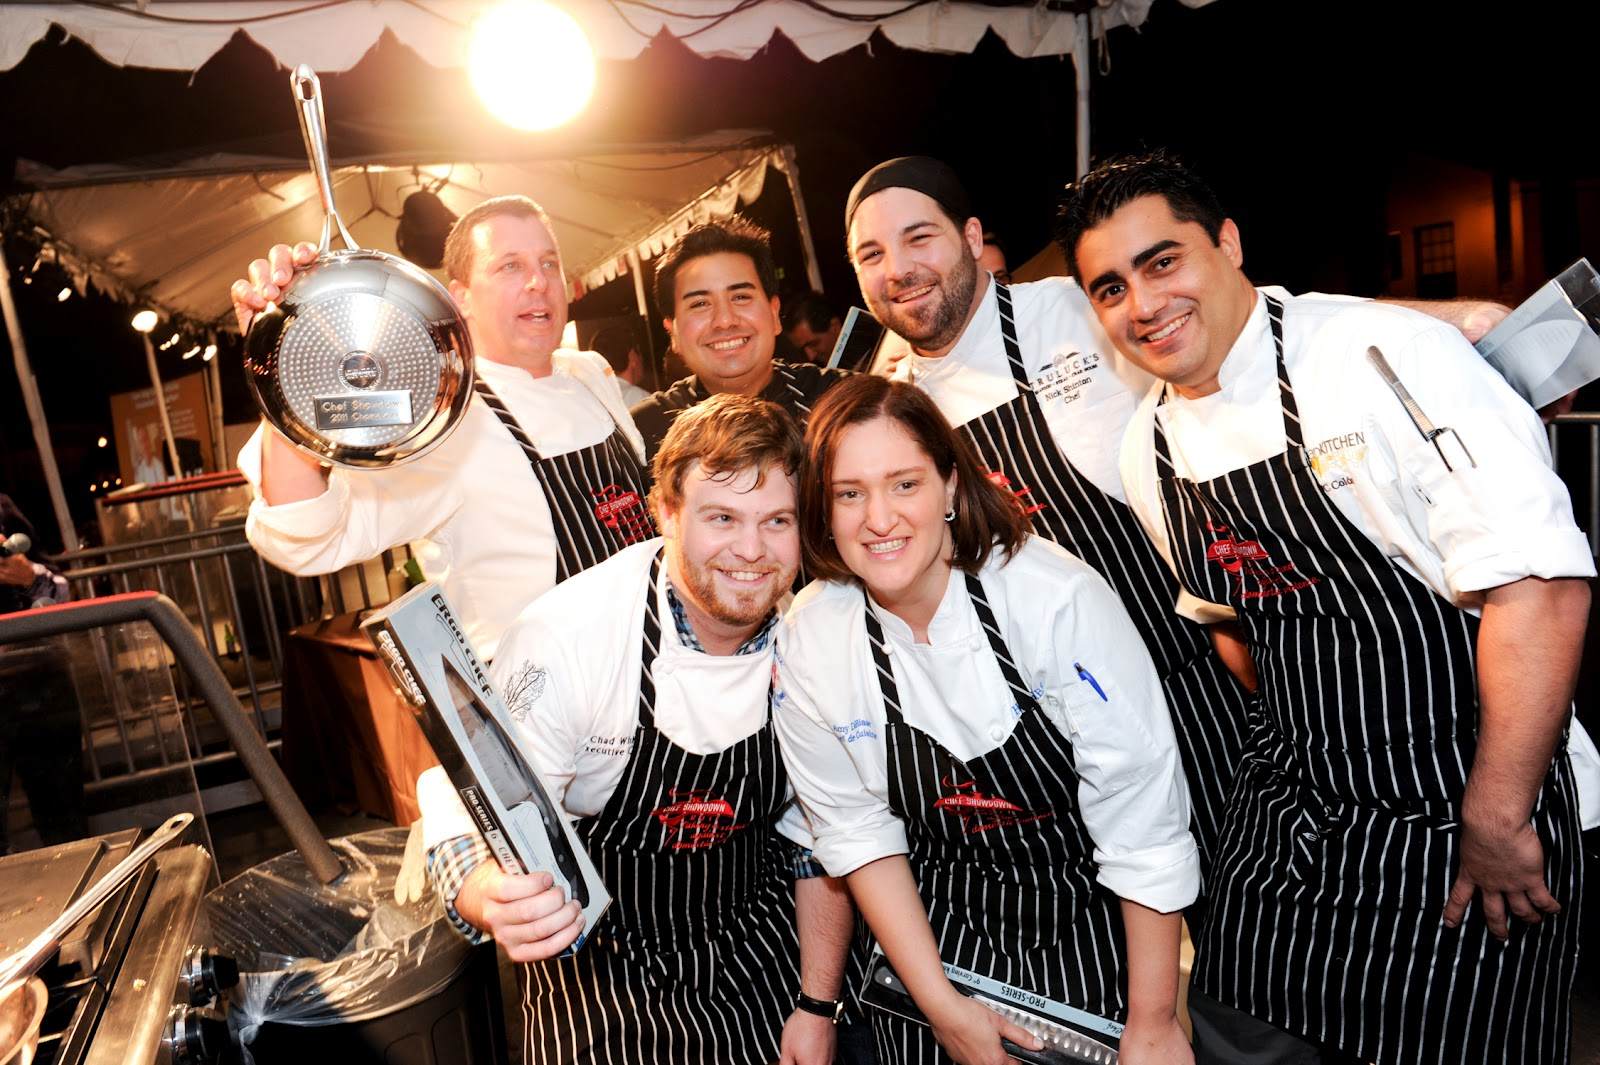 13-surprising-facts-about-chef-showdown-for-charity